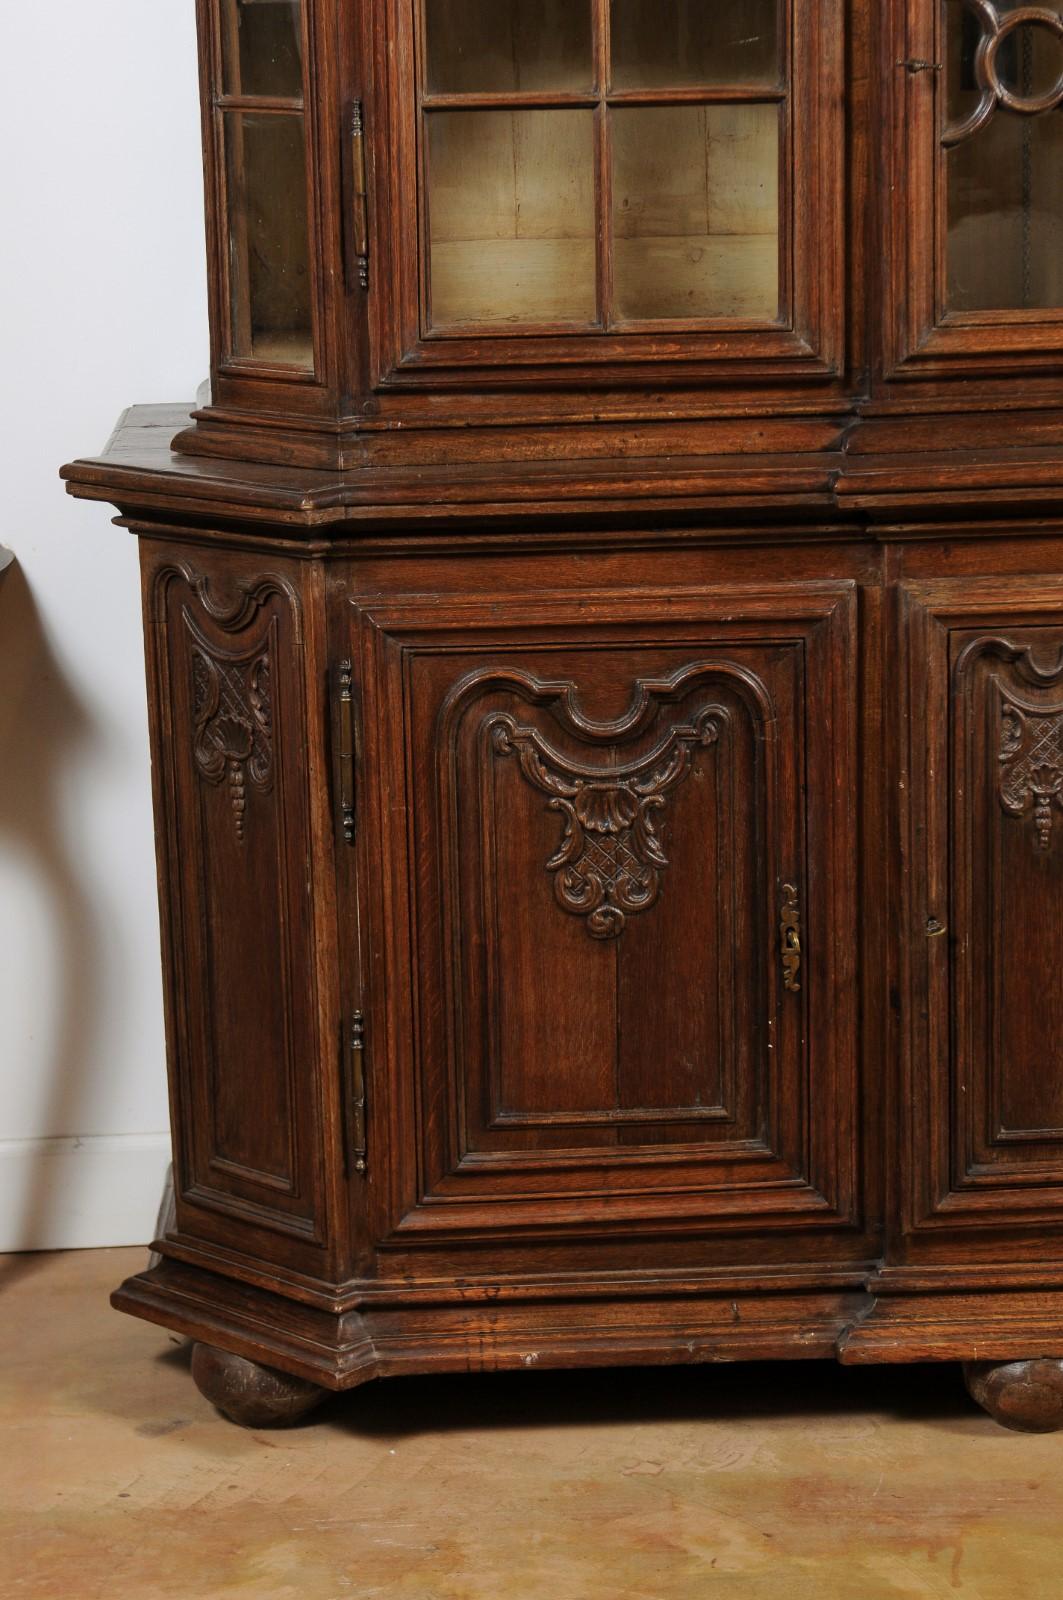 A Dutch oak buffet à deux-corps from the late 18th century, with glass doors, canted sides, carved panels and central clock. Born in the Netherlands during the last decade of the 18th century, this oak buffet à deux-corps features a bonnet-shaped